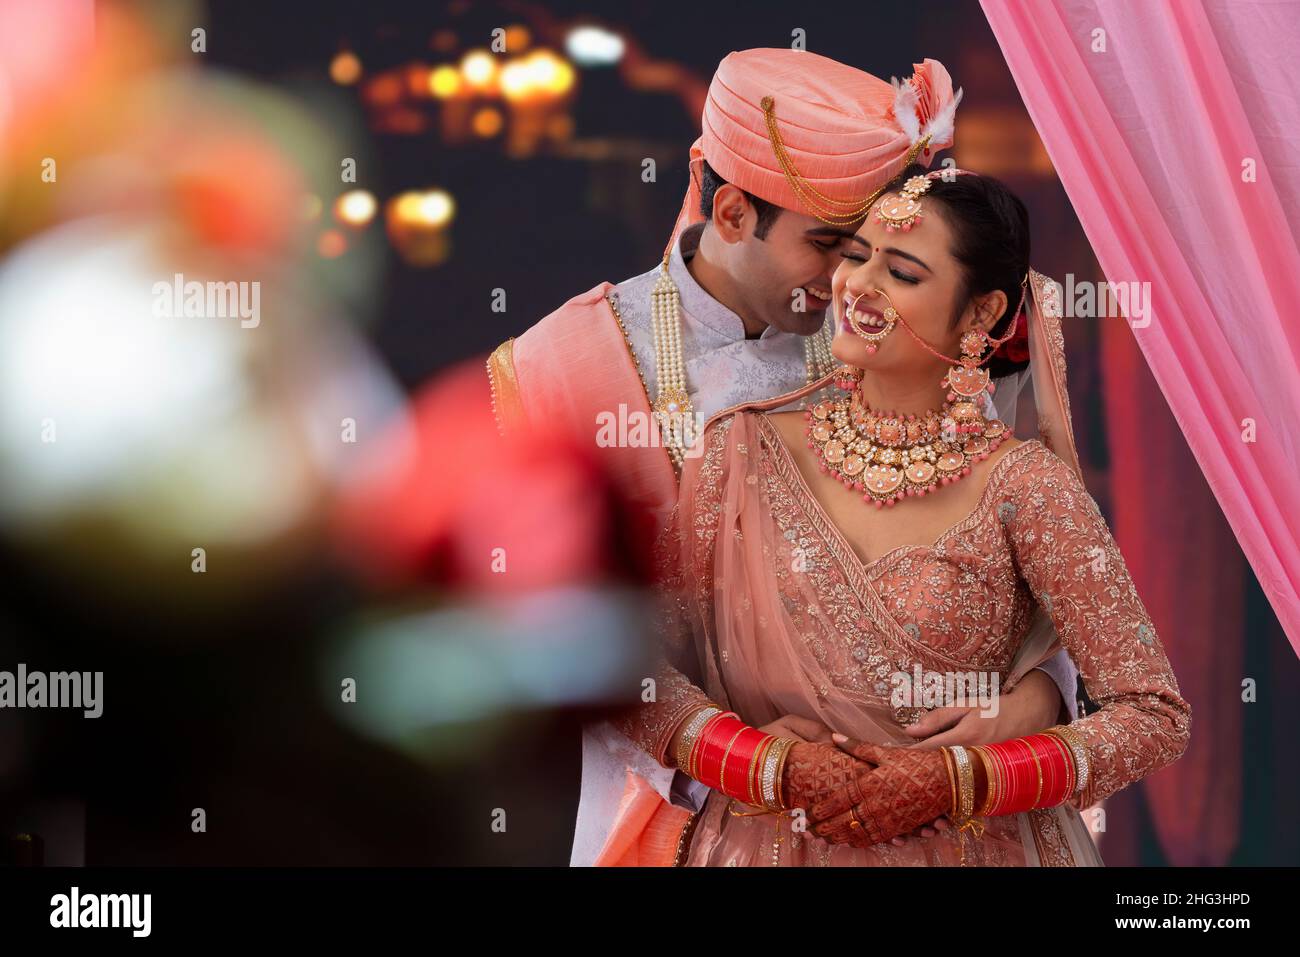 Komal and Shahrukh's Pakistani Wedding • Steeped In Fairy Tales